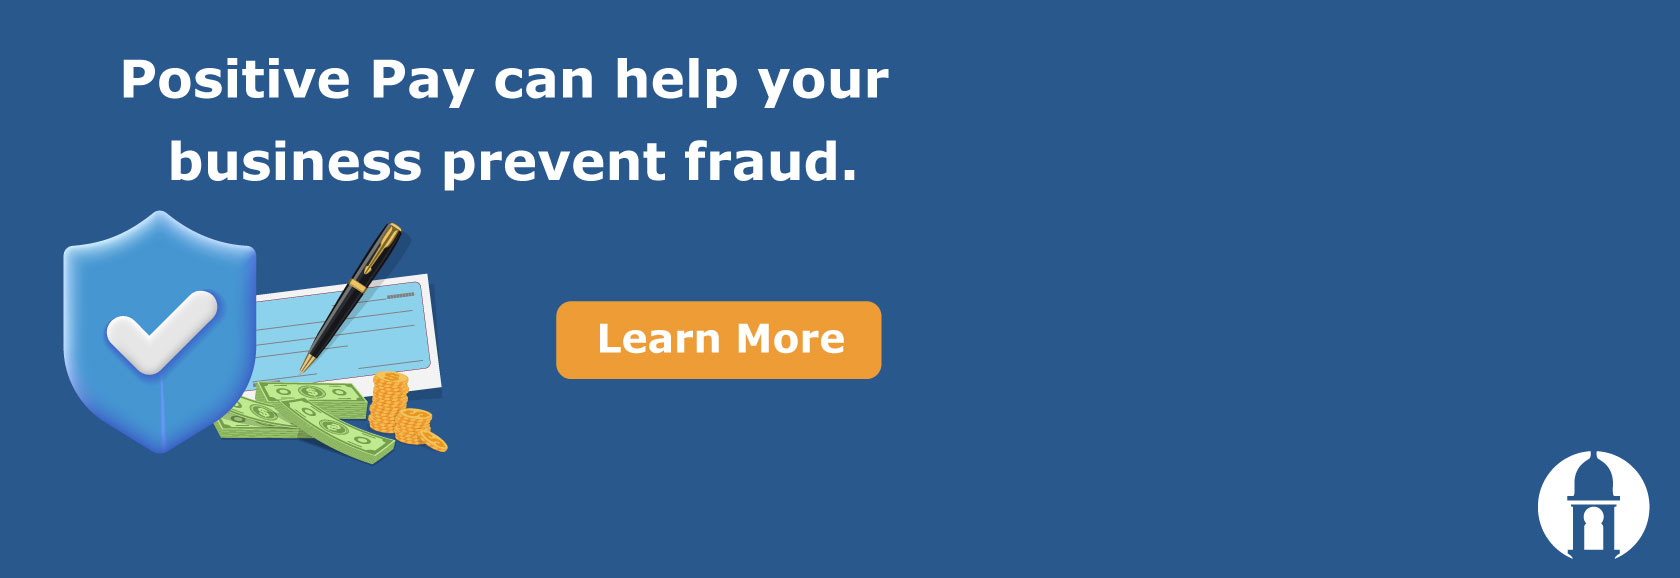 Positive Pay helps businesses prevent fraud